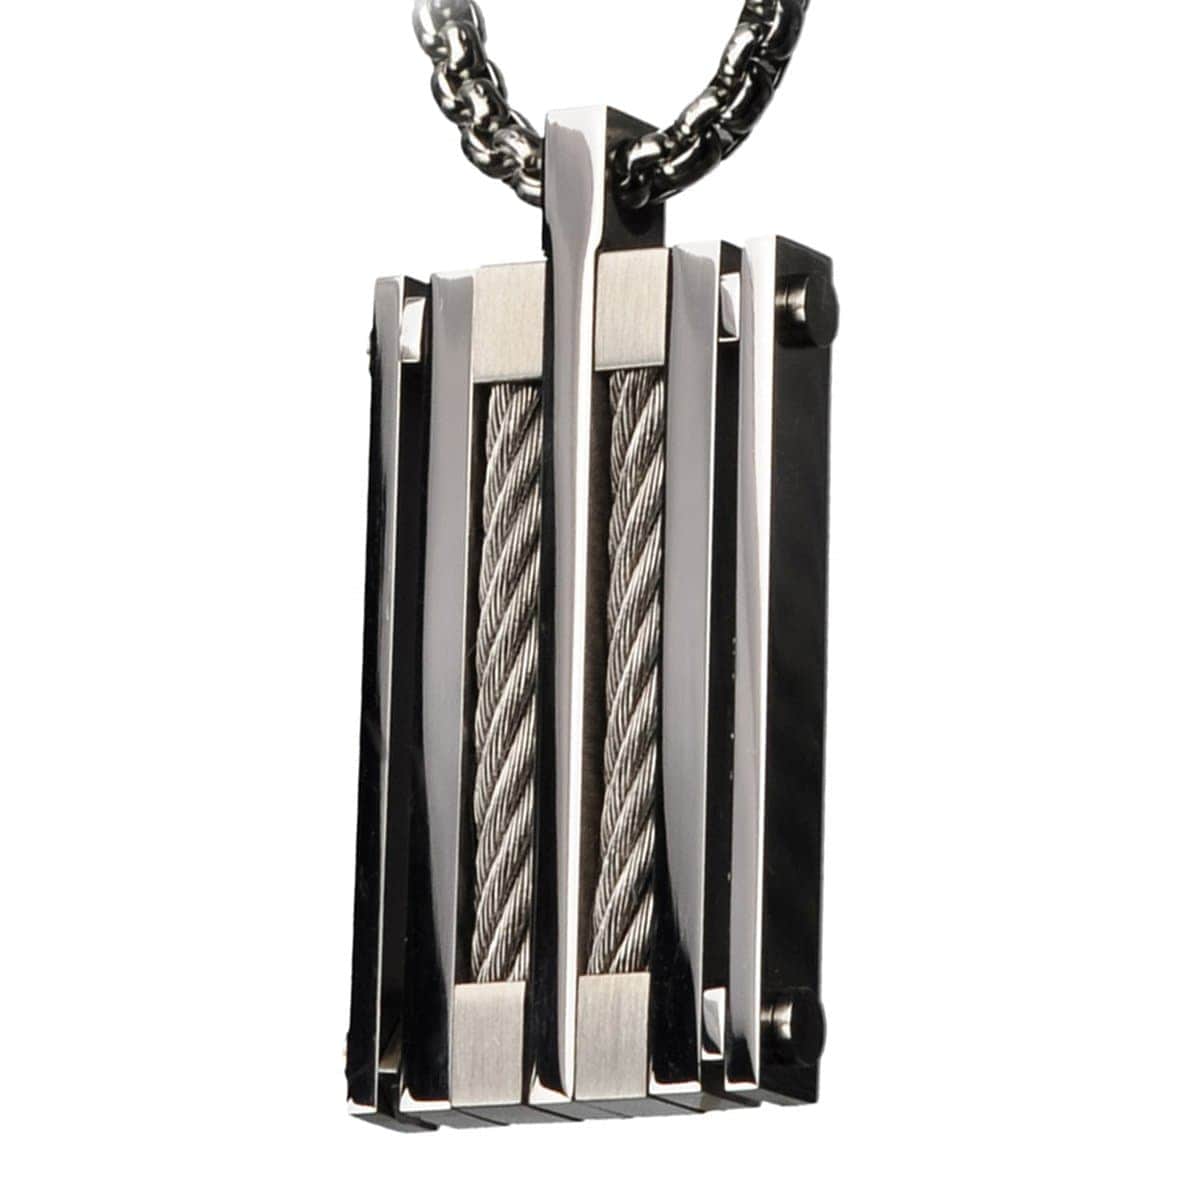 INOX JEWELRY Pendants Silver Tone Stainless Steel Chunky Cable Pendant SSP4608NK